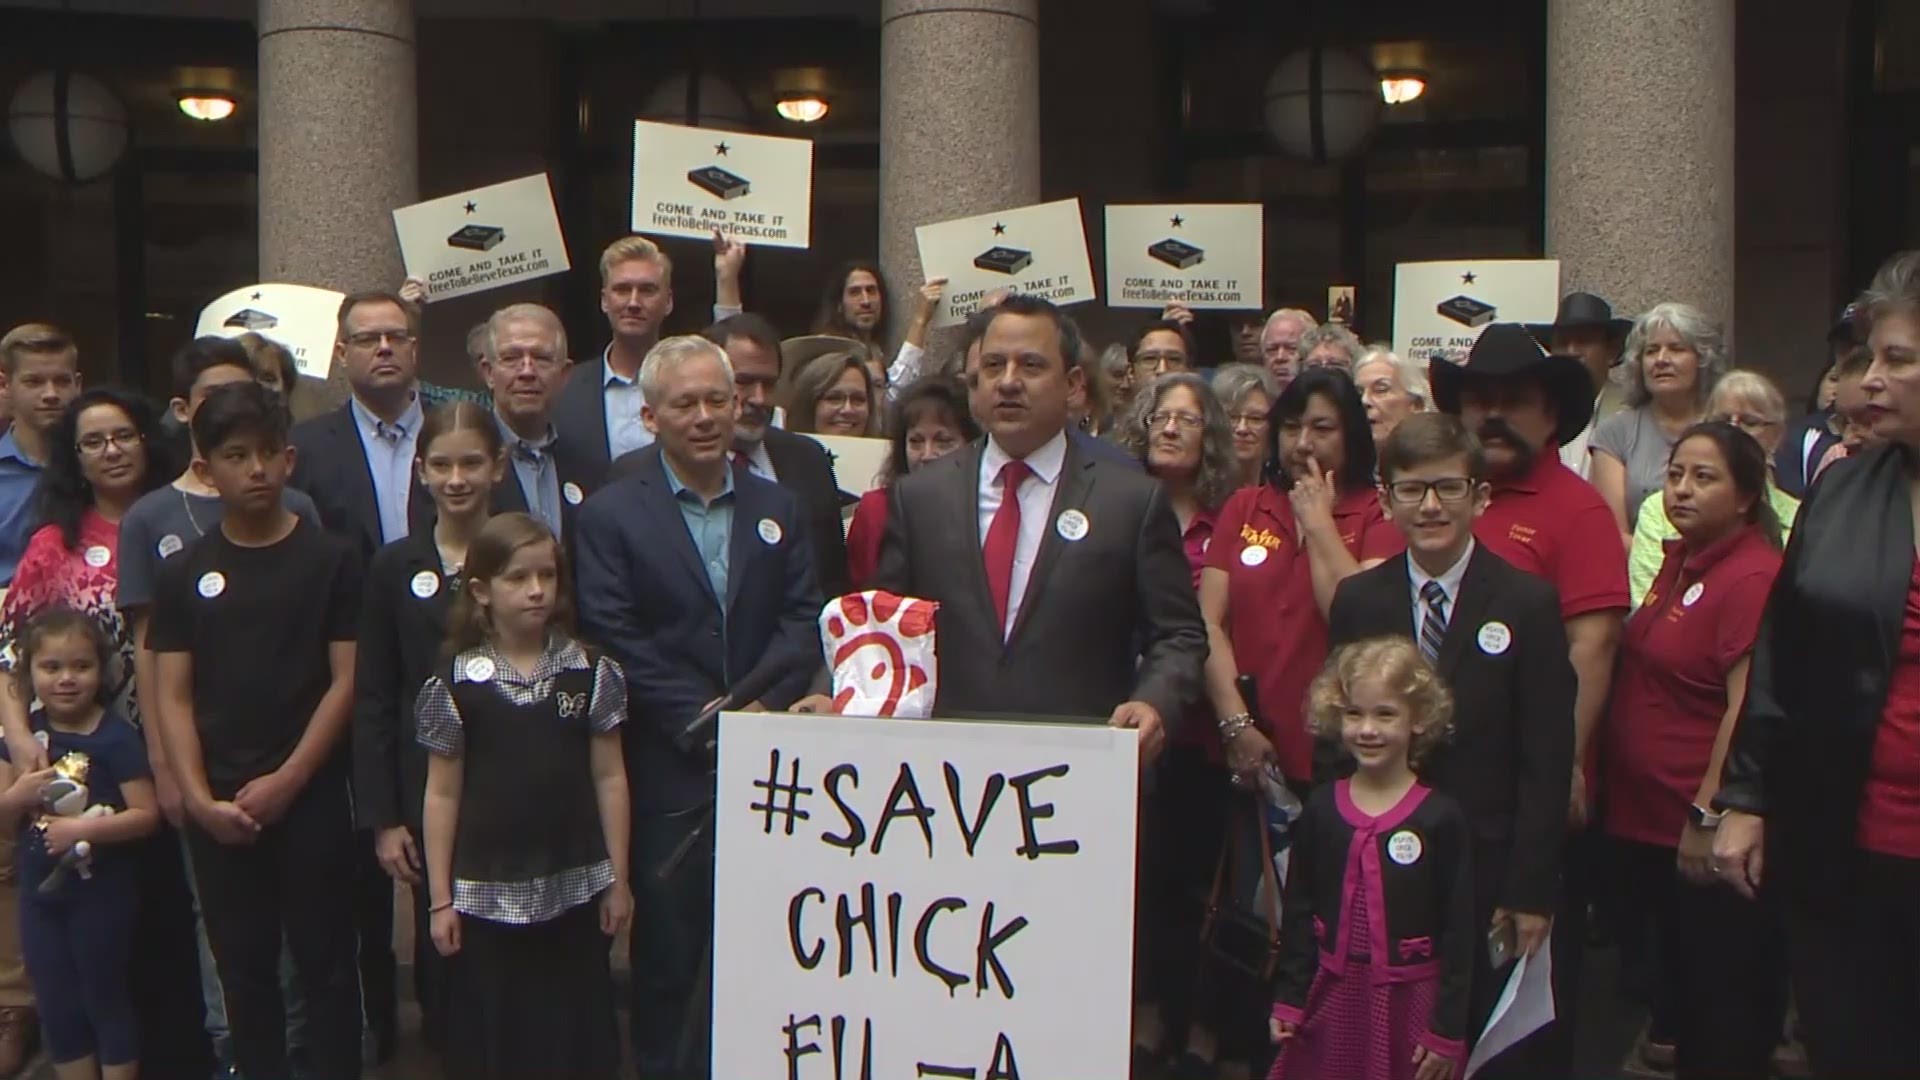 A Texas group with a stated mission to preserve religious values made an appearance at the Texas State Capitol during a hearing about religious freedom Wednesday in an effort to 'save Chick-Fil-A.'